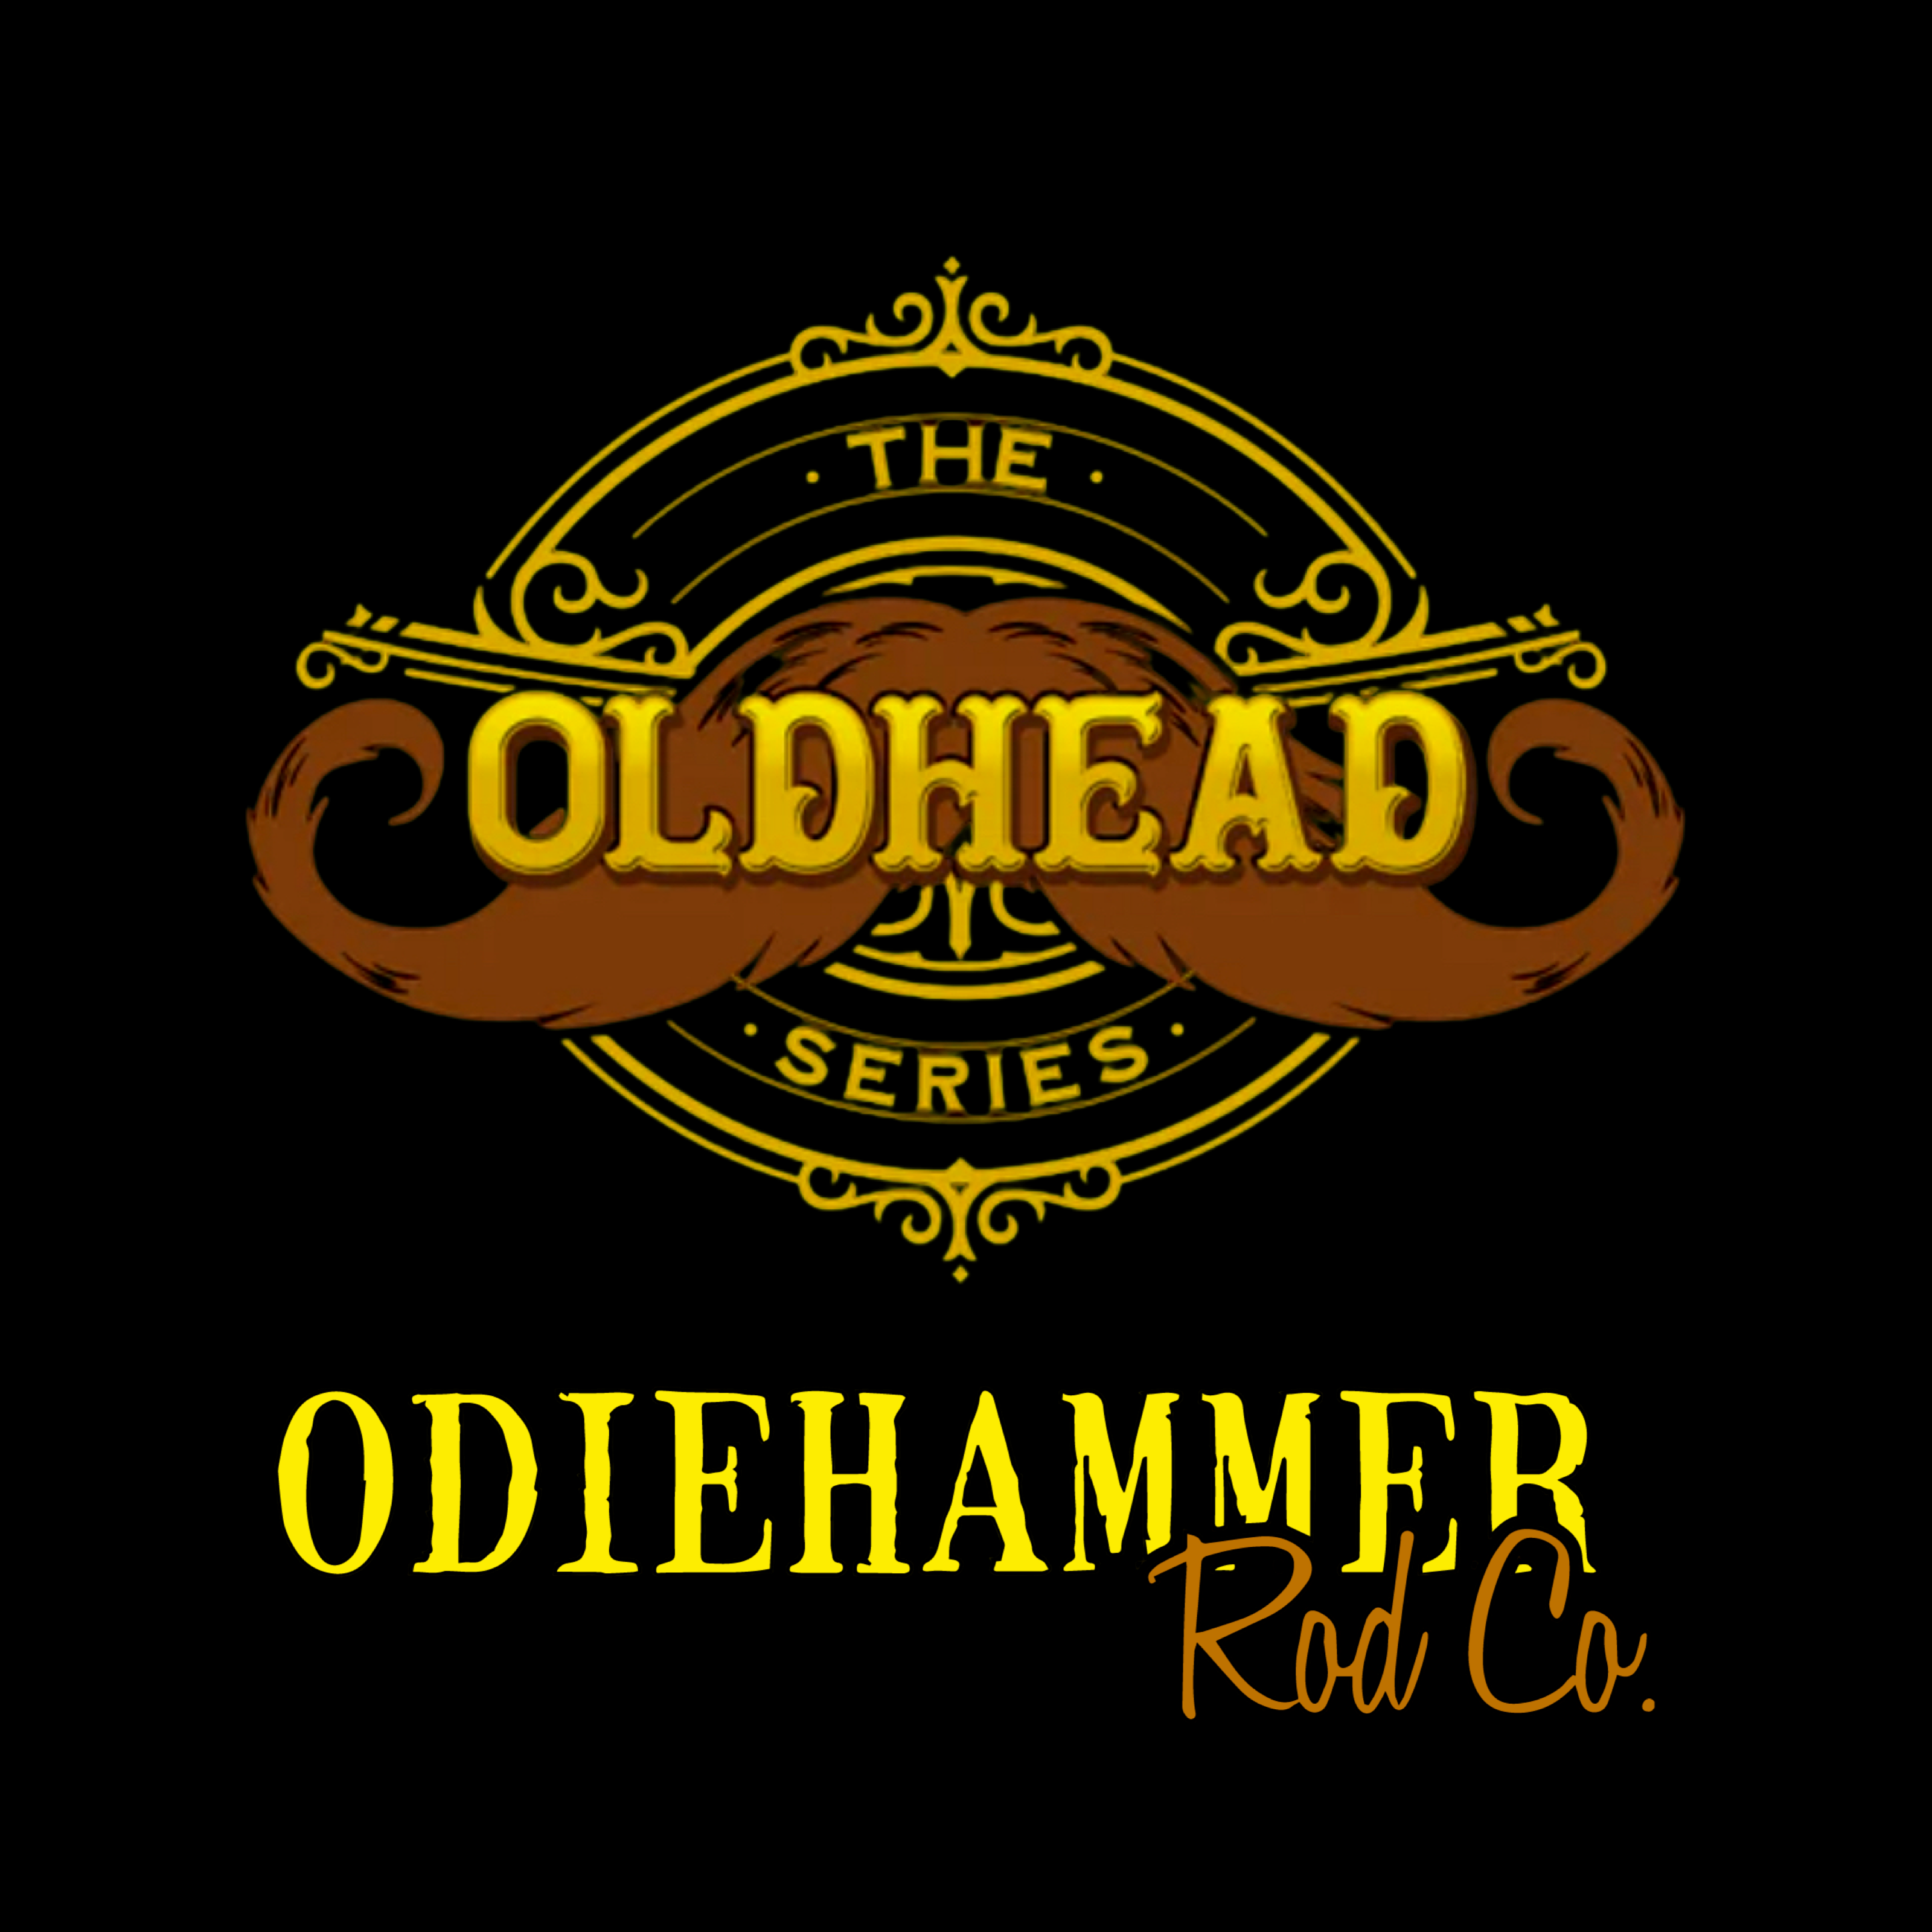 Odiehammer Rod Co. - OldHead Series Casting Rods